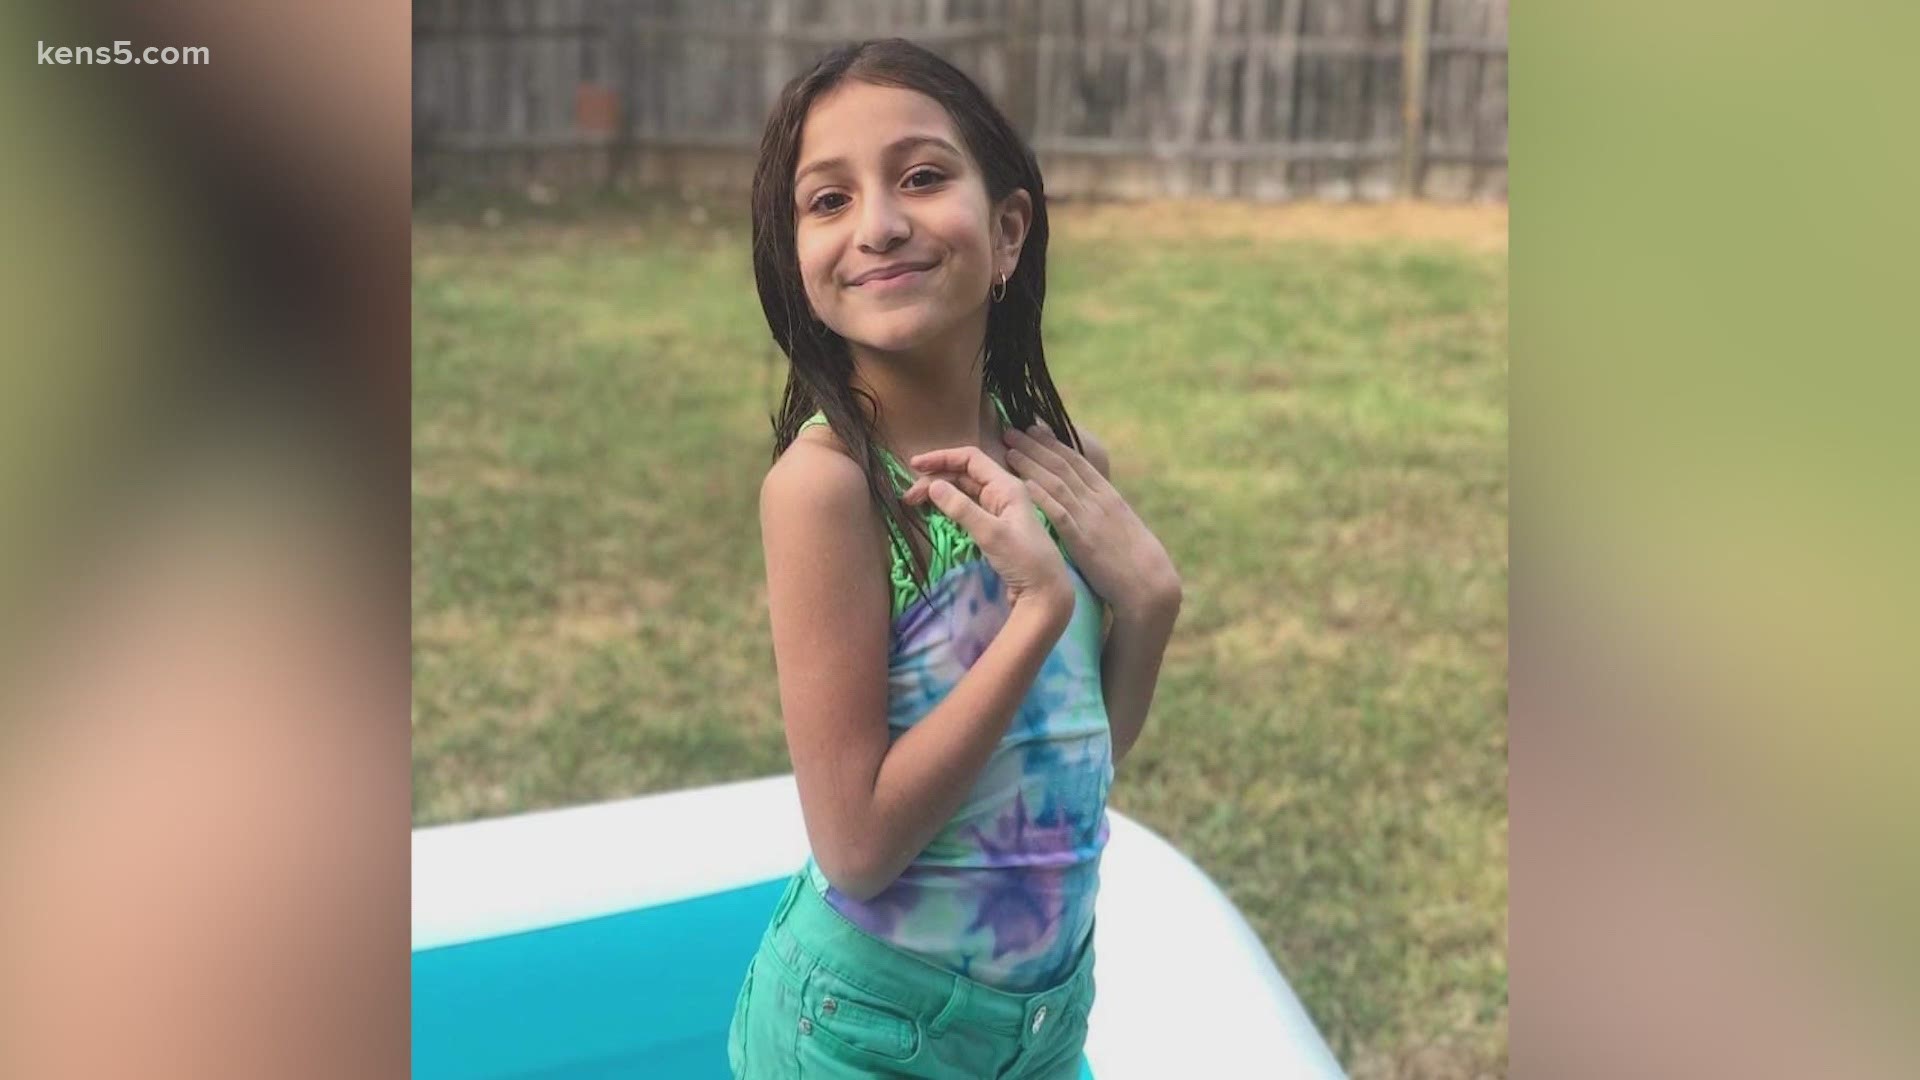 12-year-old Samantha Caballero was pronounced dead Monday evening after the car she was riding in on De Zavala Road Saturday night was hit head on.